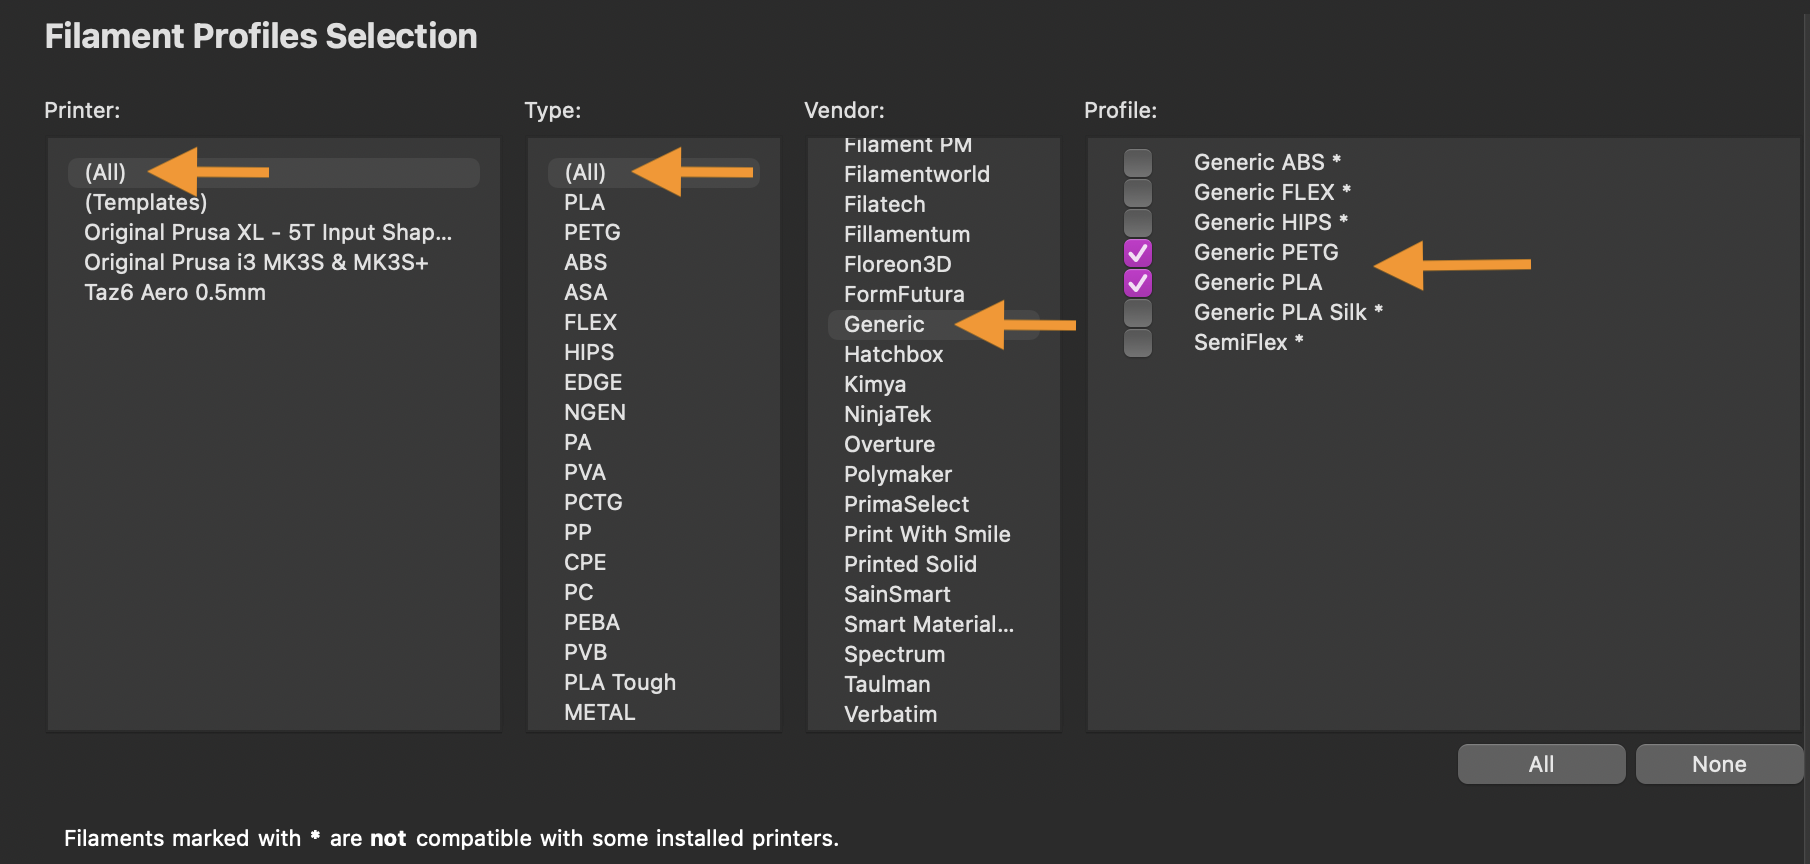 A screenshot of the Filament Profiles Selection screen in the PrusaSlicer Configuration Assistant. It has arrows to indicate that you should select the "(All)" category under "Printer:", the "(All)" category under "Type:", the "Generic" category under "Vendor" and then check the boxes next to "Generic PETG" and "Generic PLA"